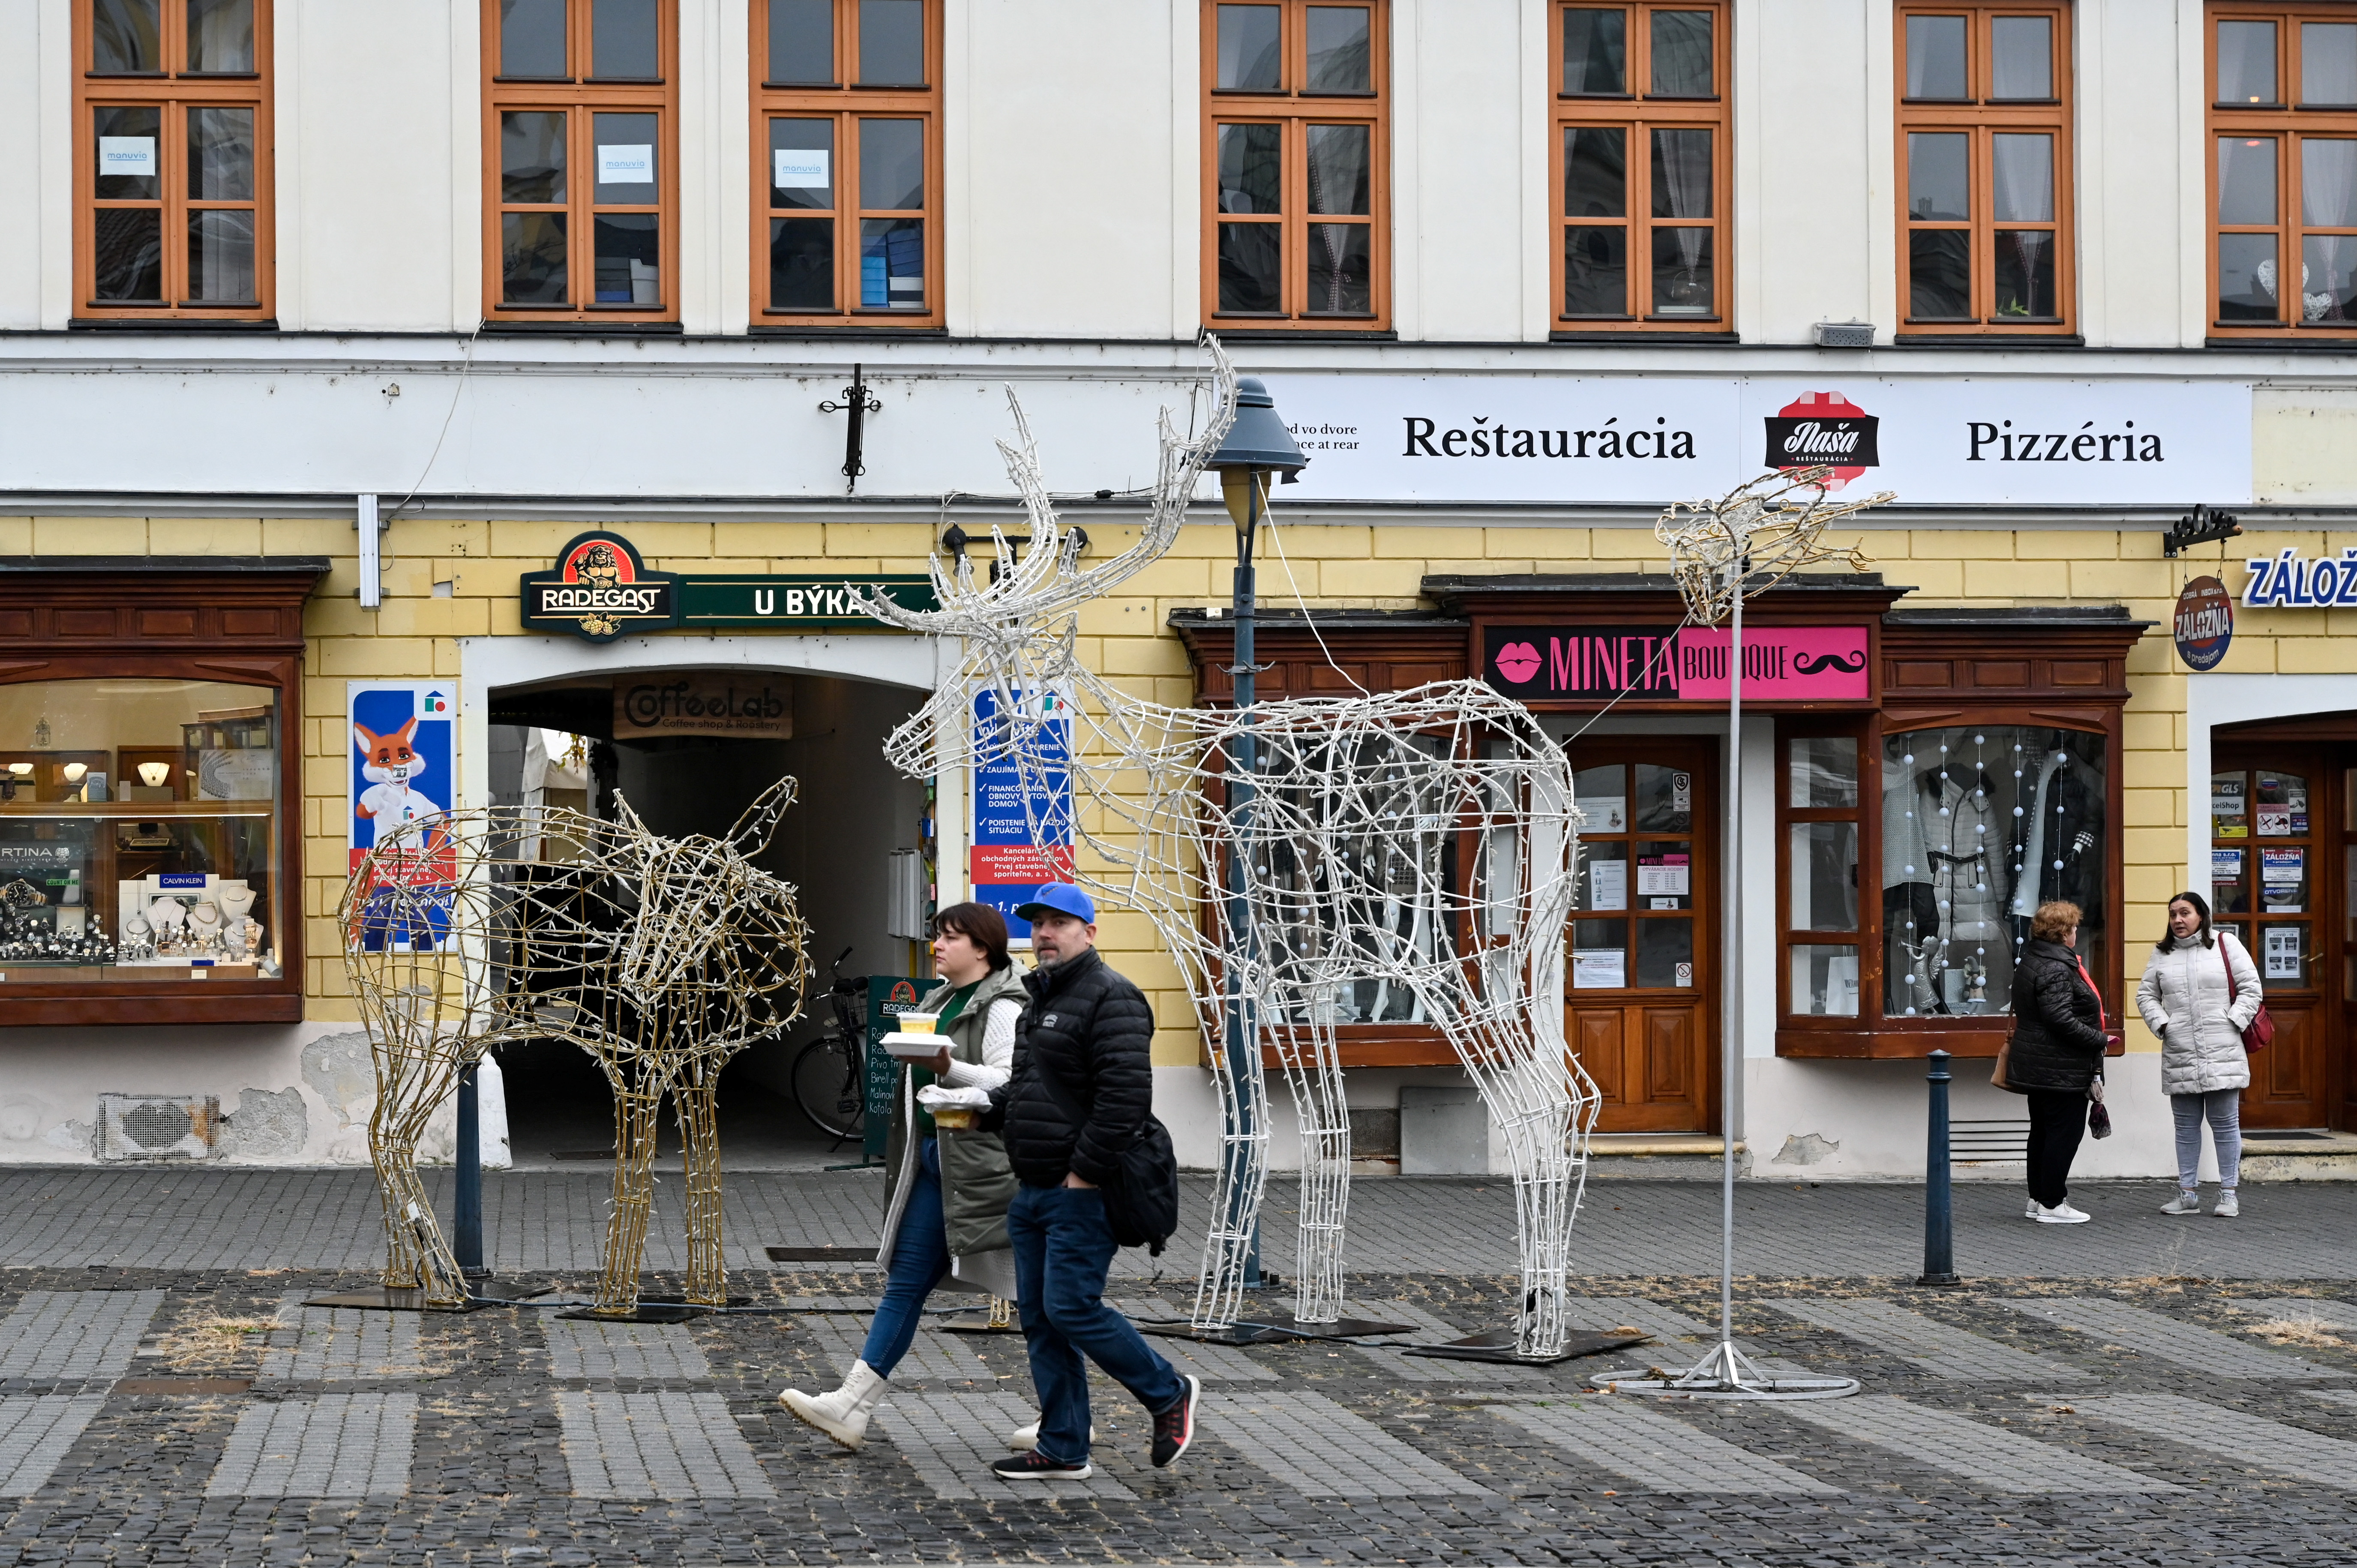 People walk past closed restaurants as the Slovak government mandated further restrictions to curb the spread of the coronavirus disease (COVID-19), in Trencin, Slovakia, November 25, 2021. REUTERS/Radovan Stoklasa